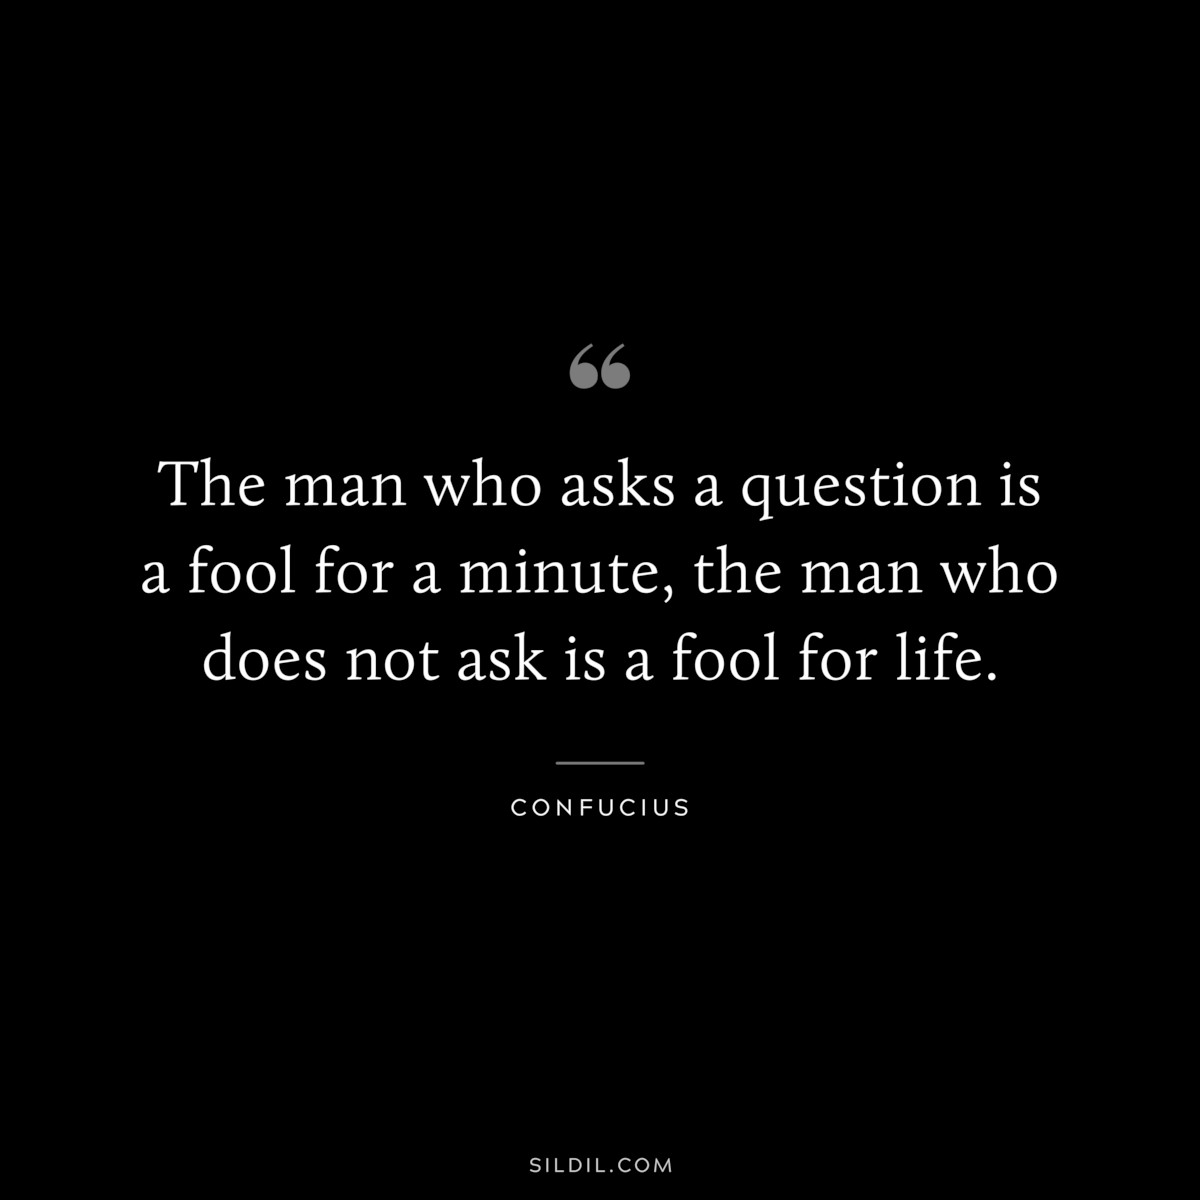 The man who asks a question is a fool for a minute, the man who does not ask is a fool for life. ― Confucius